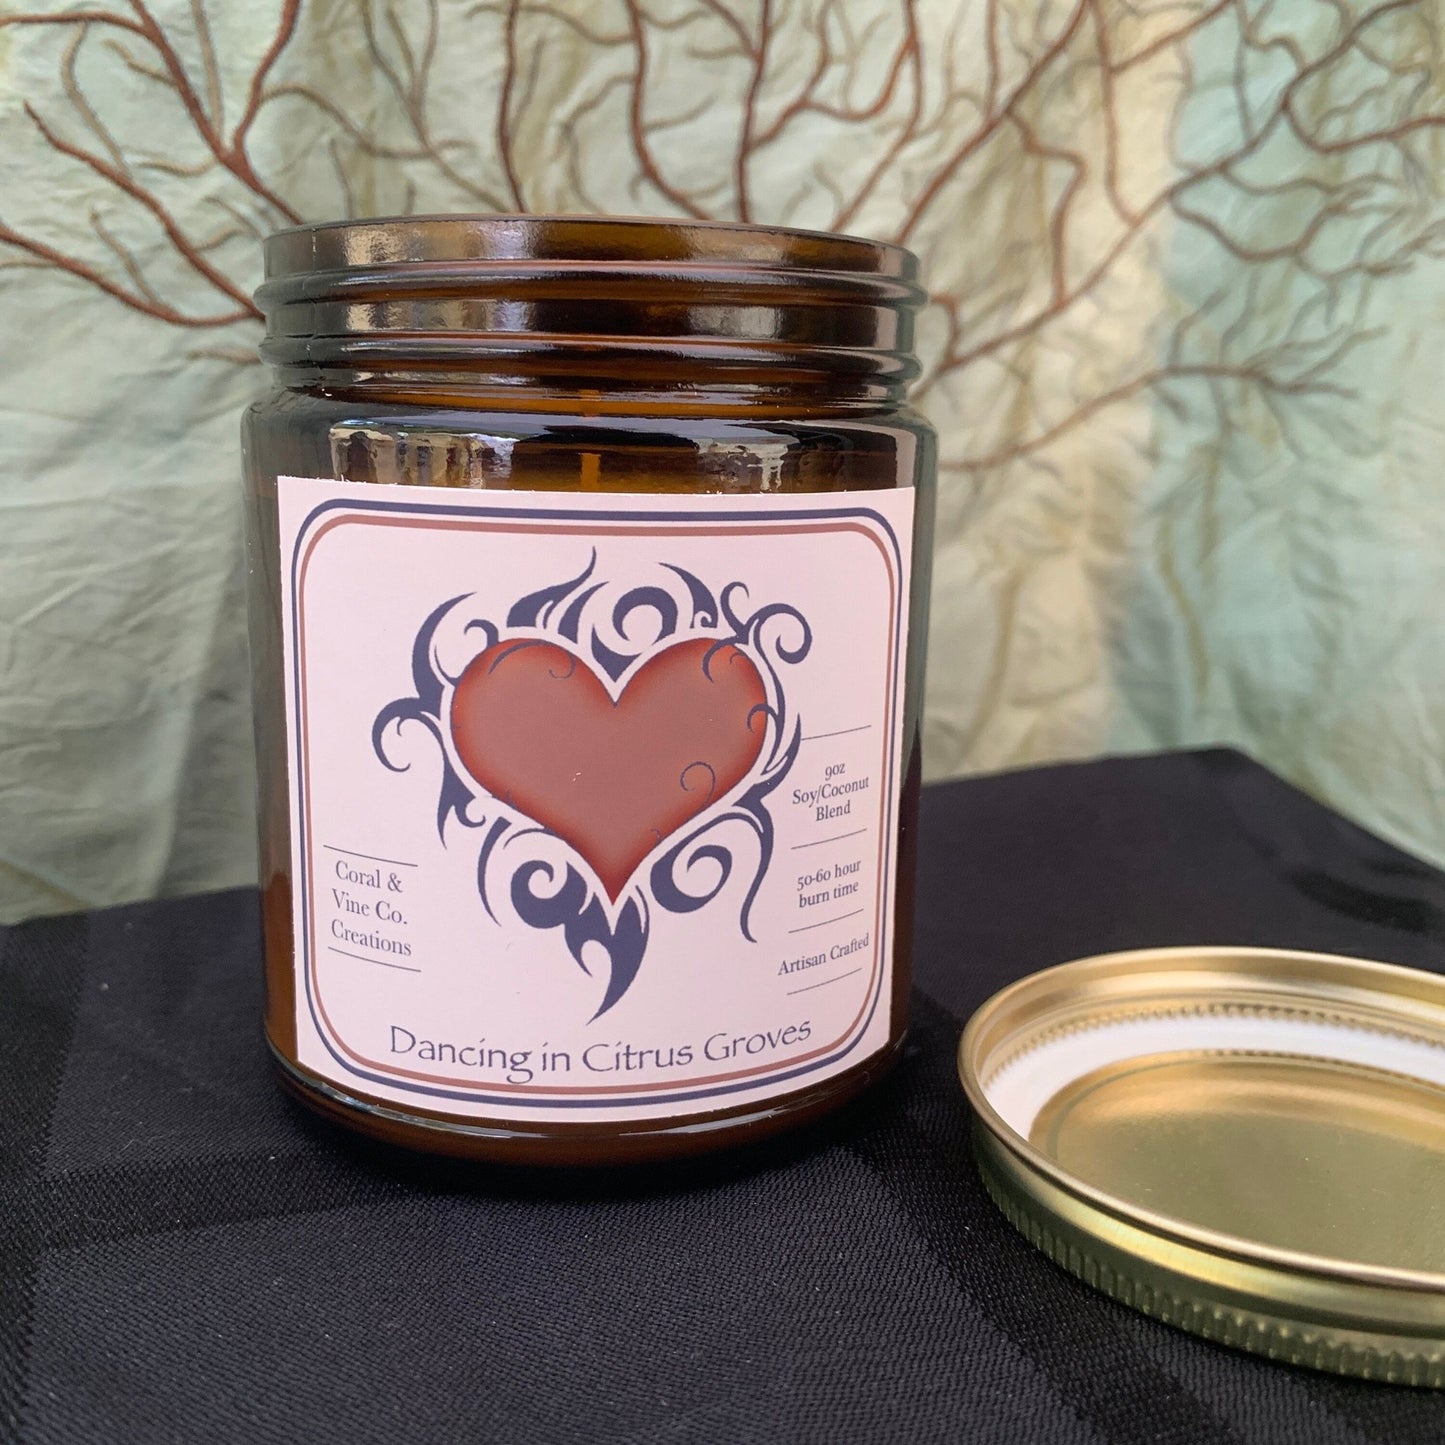 Dancing in Citrus Groves Soy Candle - Coral and Vine Co